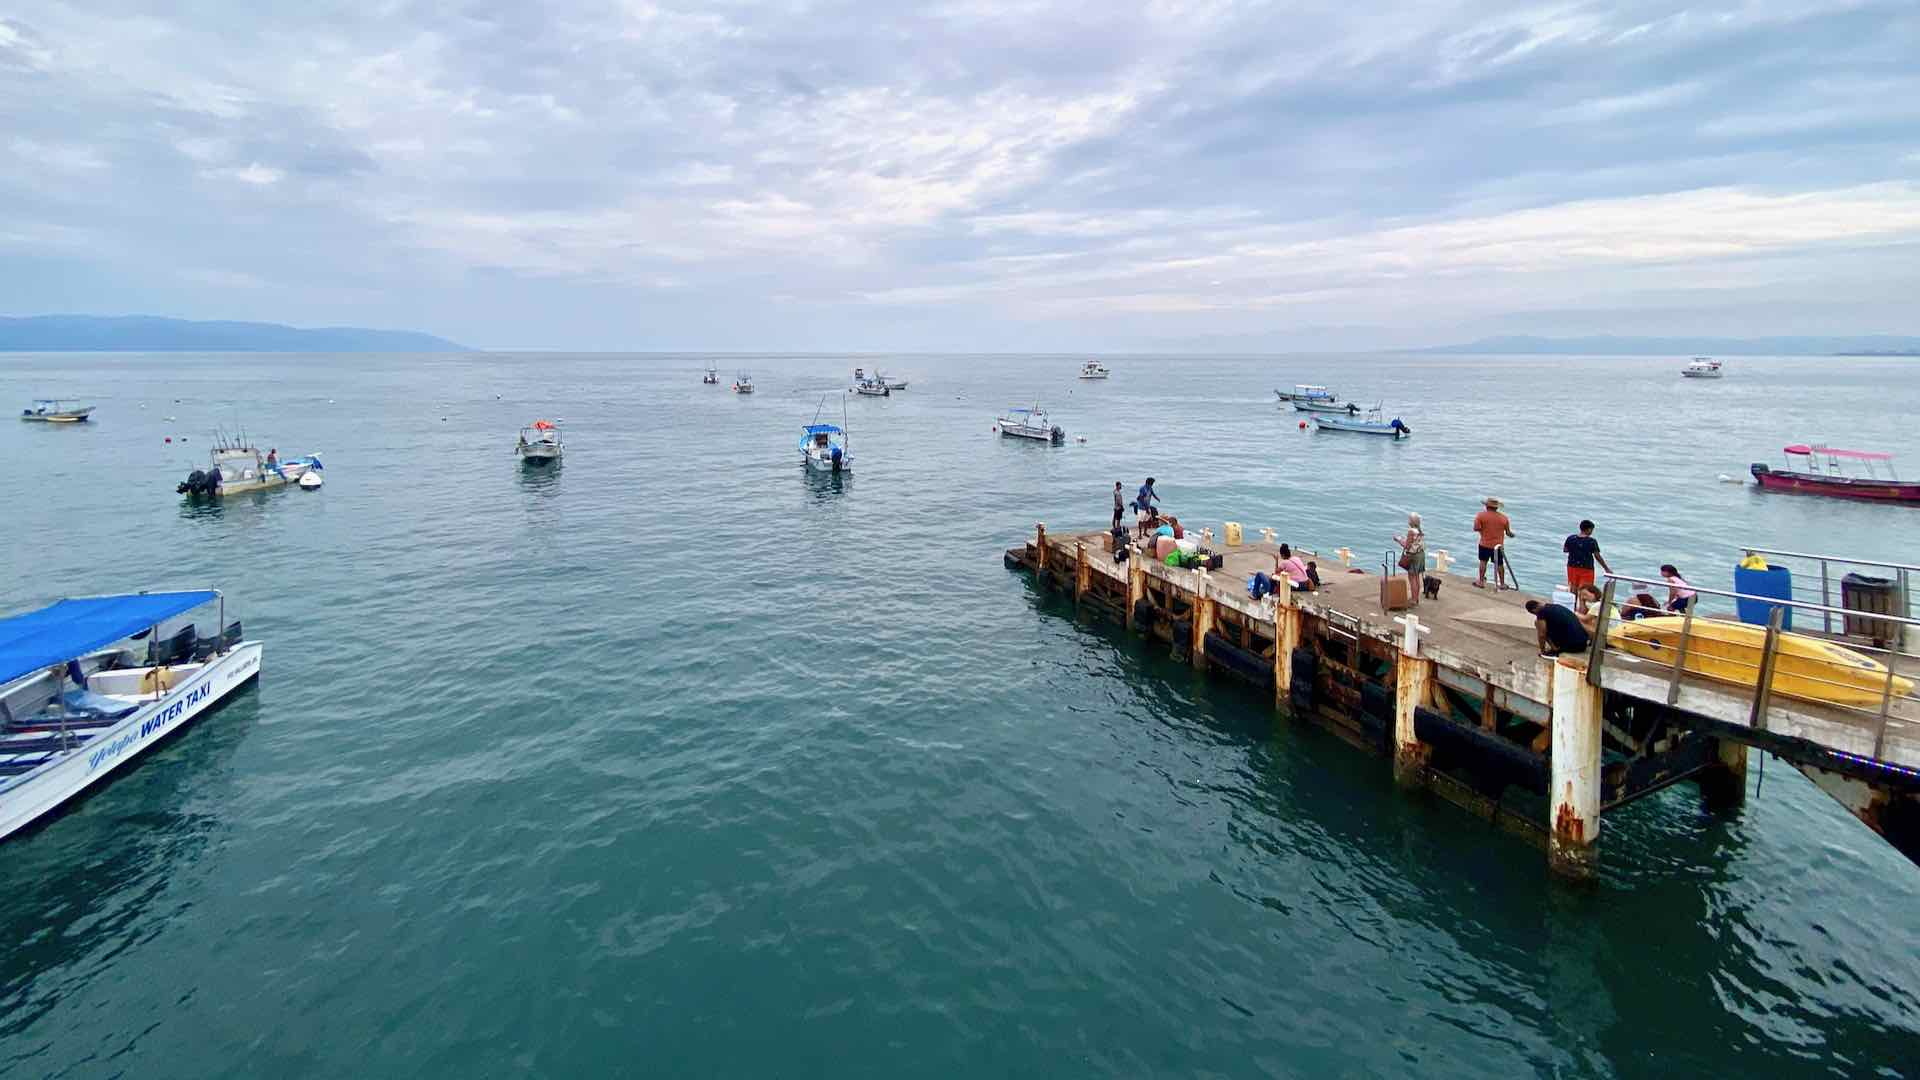 Some of the greatest parts of an adventure are simply experiencing the culture of a region. Puerto Vallarta's fishing heritage was on full display in its harbor.